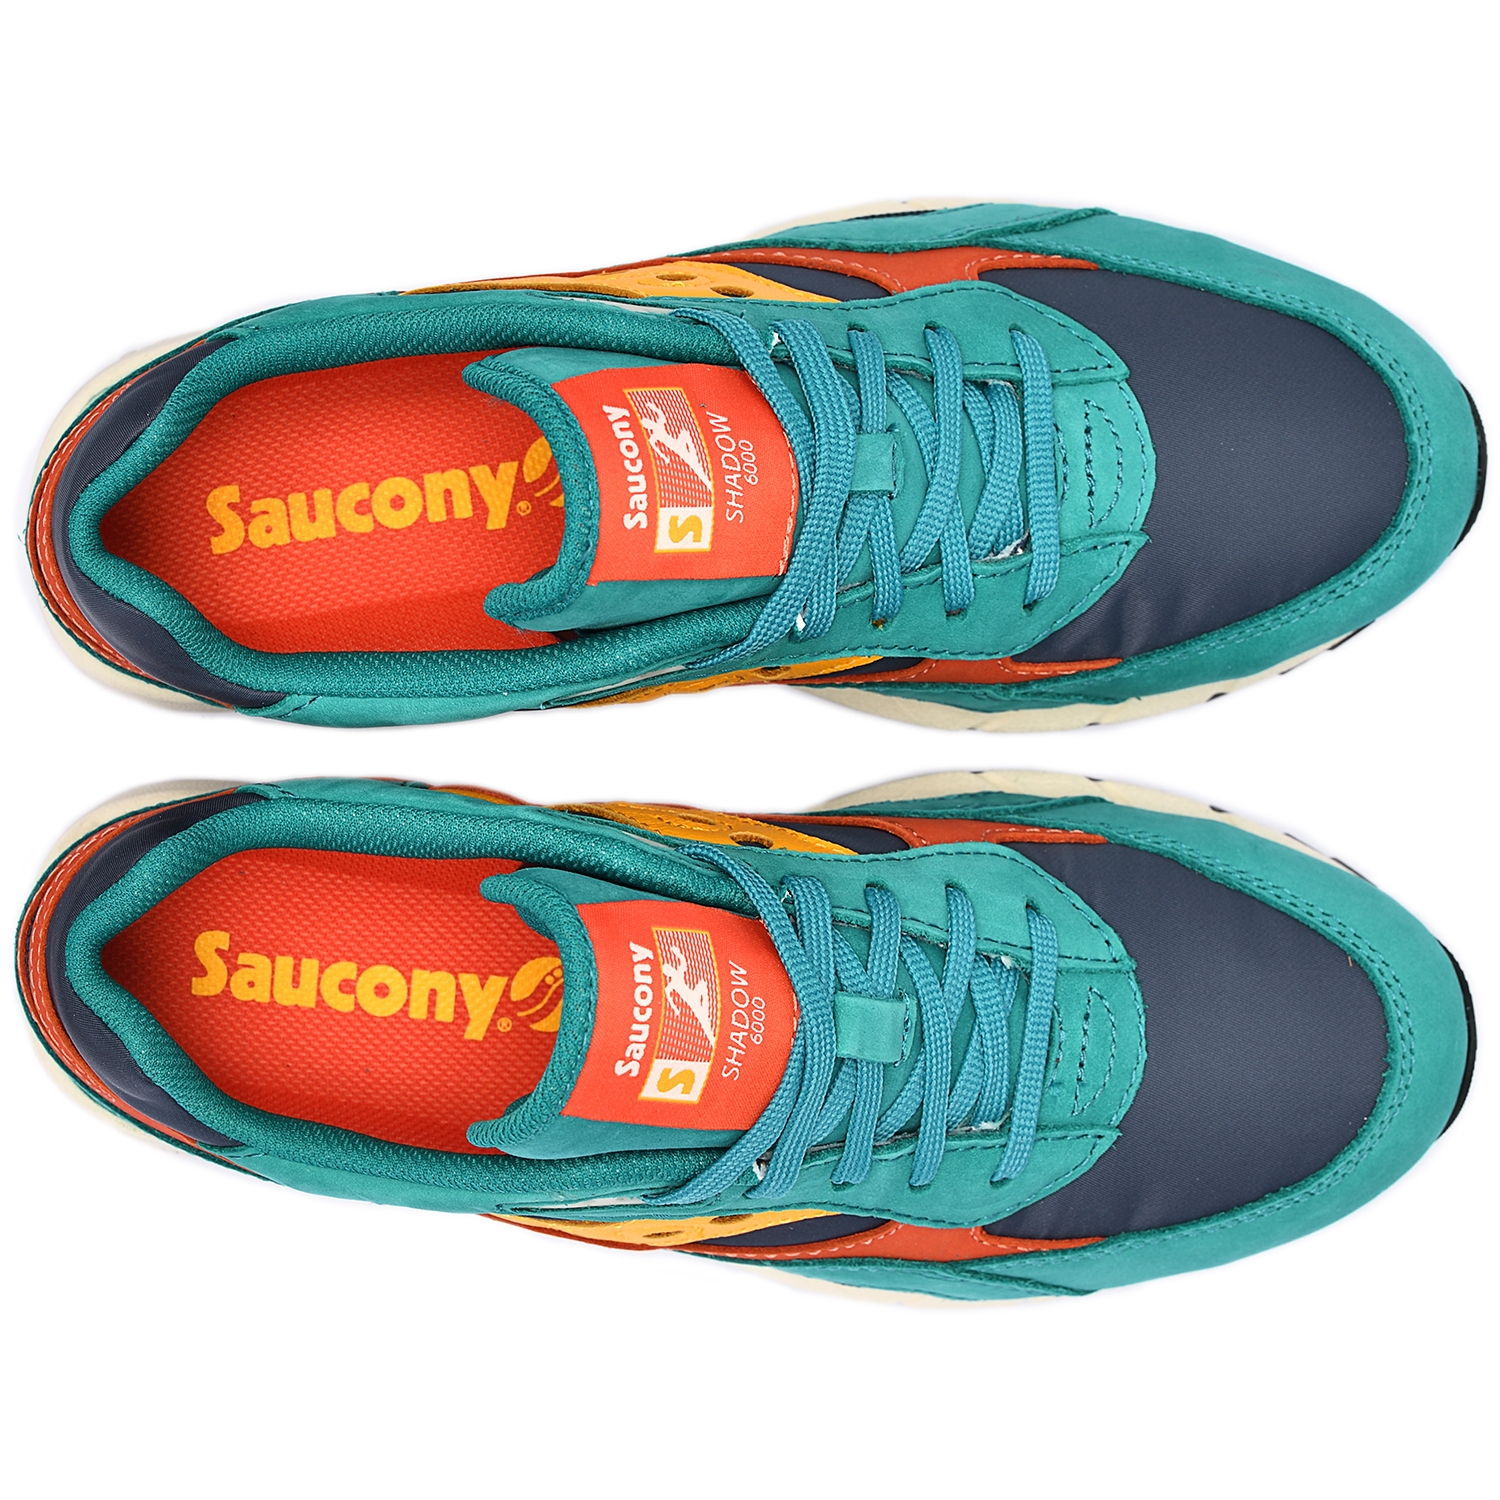 Saucony SHADOW 6000 CHANGING TIDES TEAL / BLUE